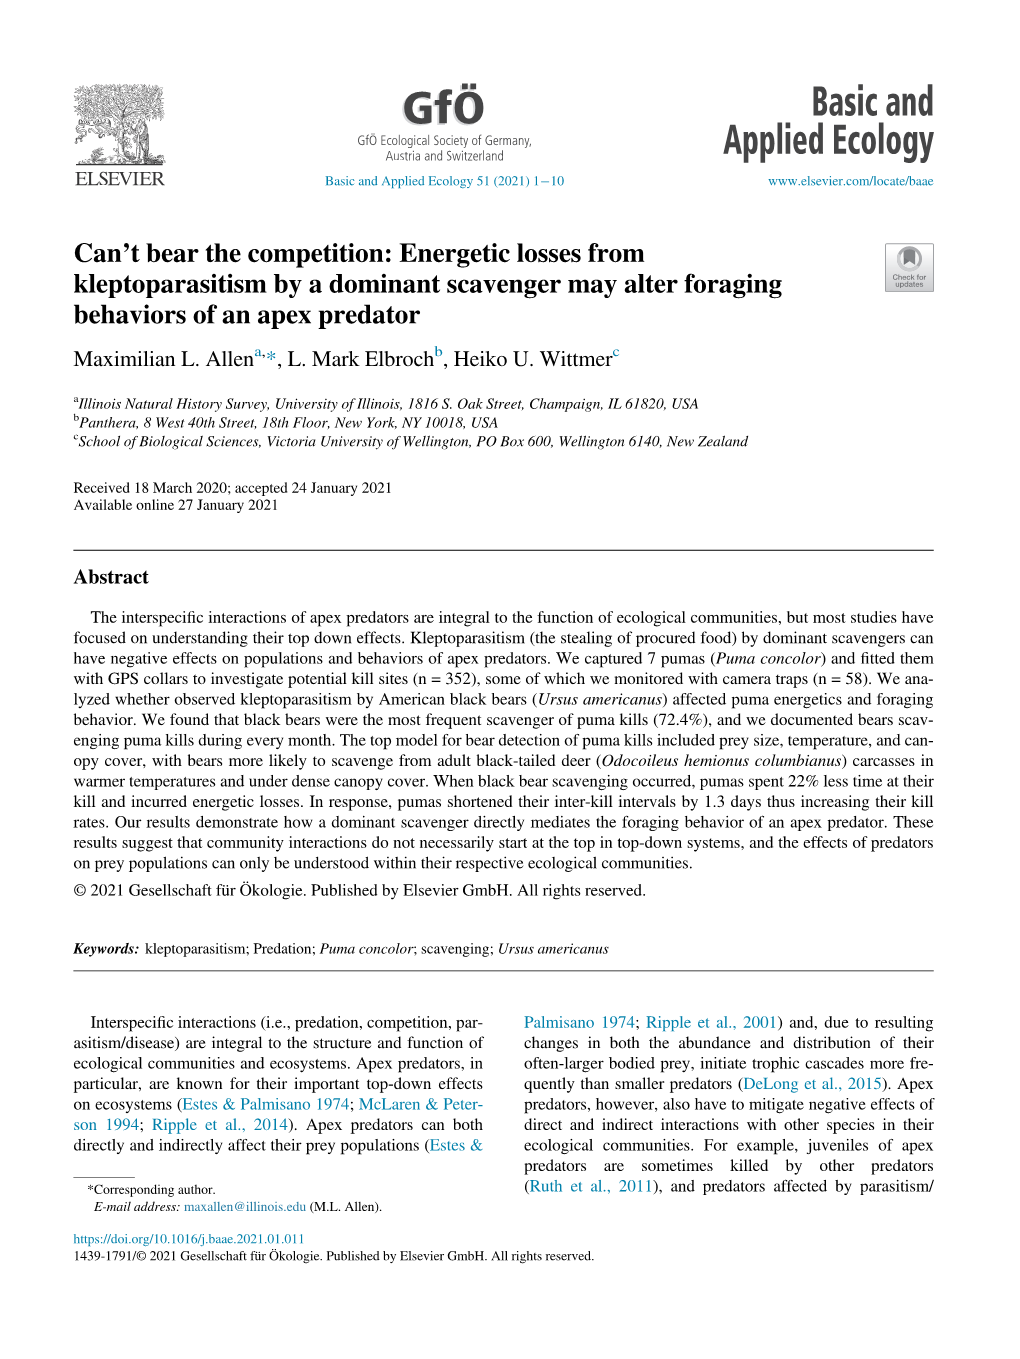 Can't Bear the Competition: Energetic Losses from Kleptoparasitism by A